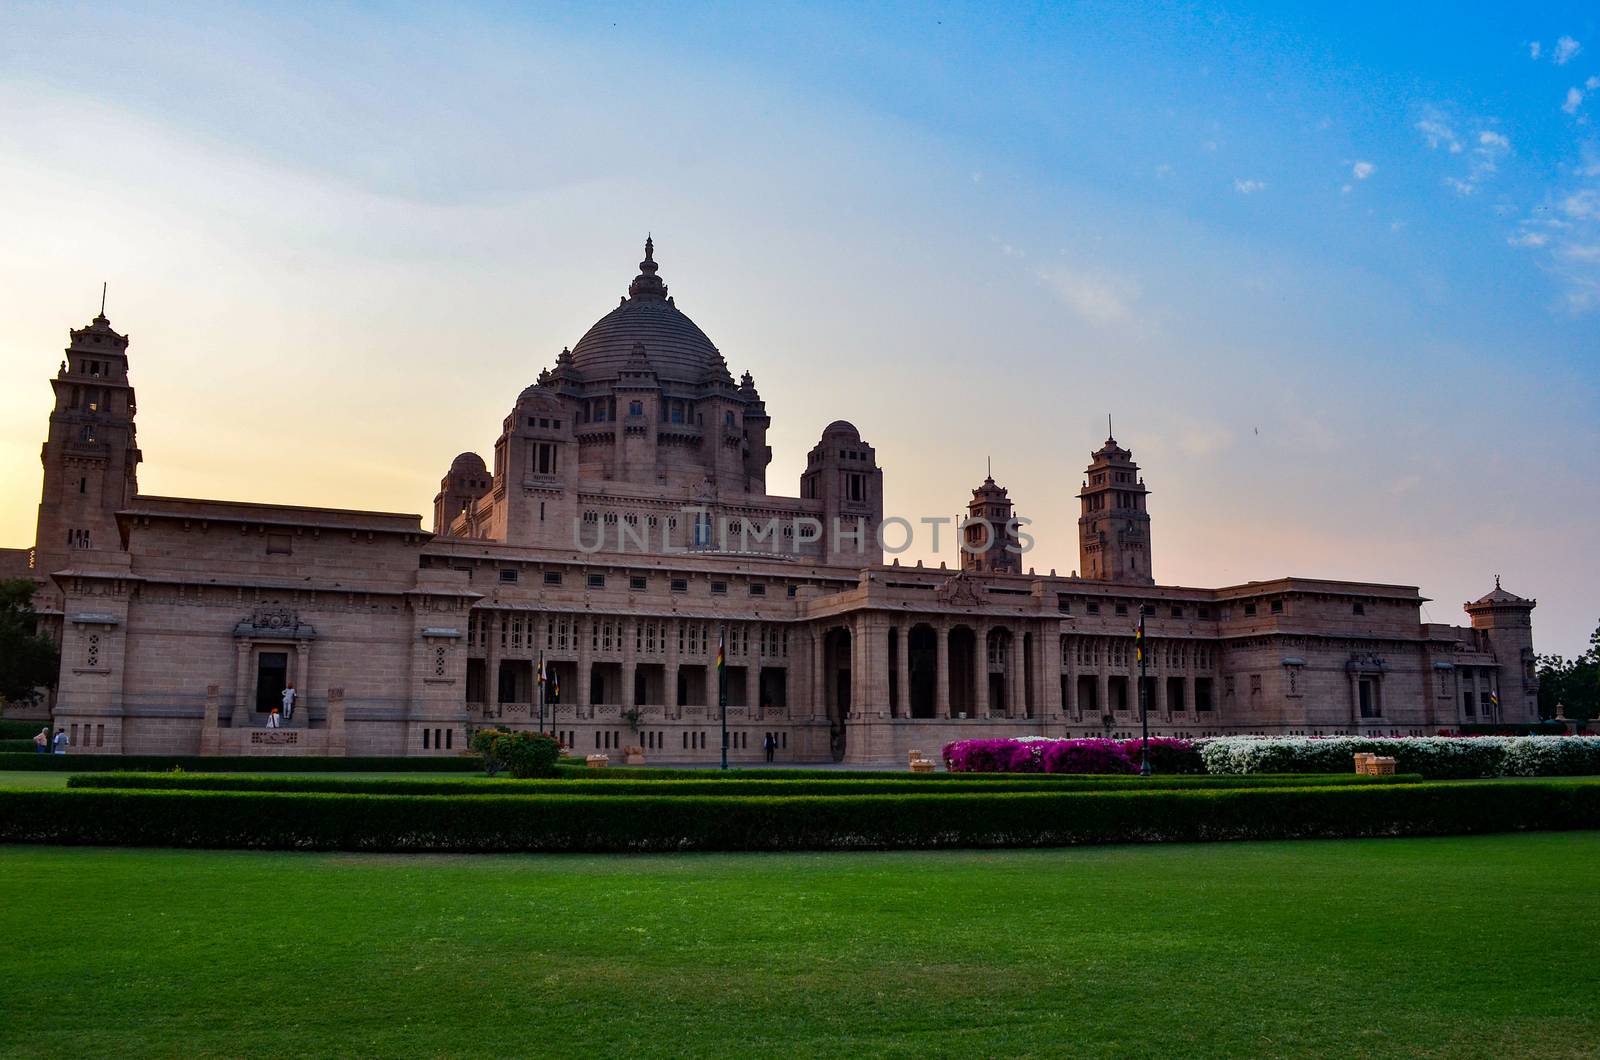 Majestic view of the Umaid Bhawan palace and hotel against a setting sun in Jodhpur, Rajasthan, India. This elegant hotel in a grand building was once home to the Jodphur royal family.